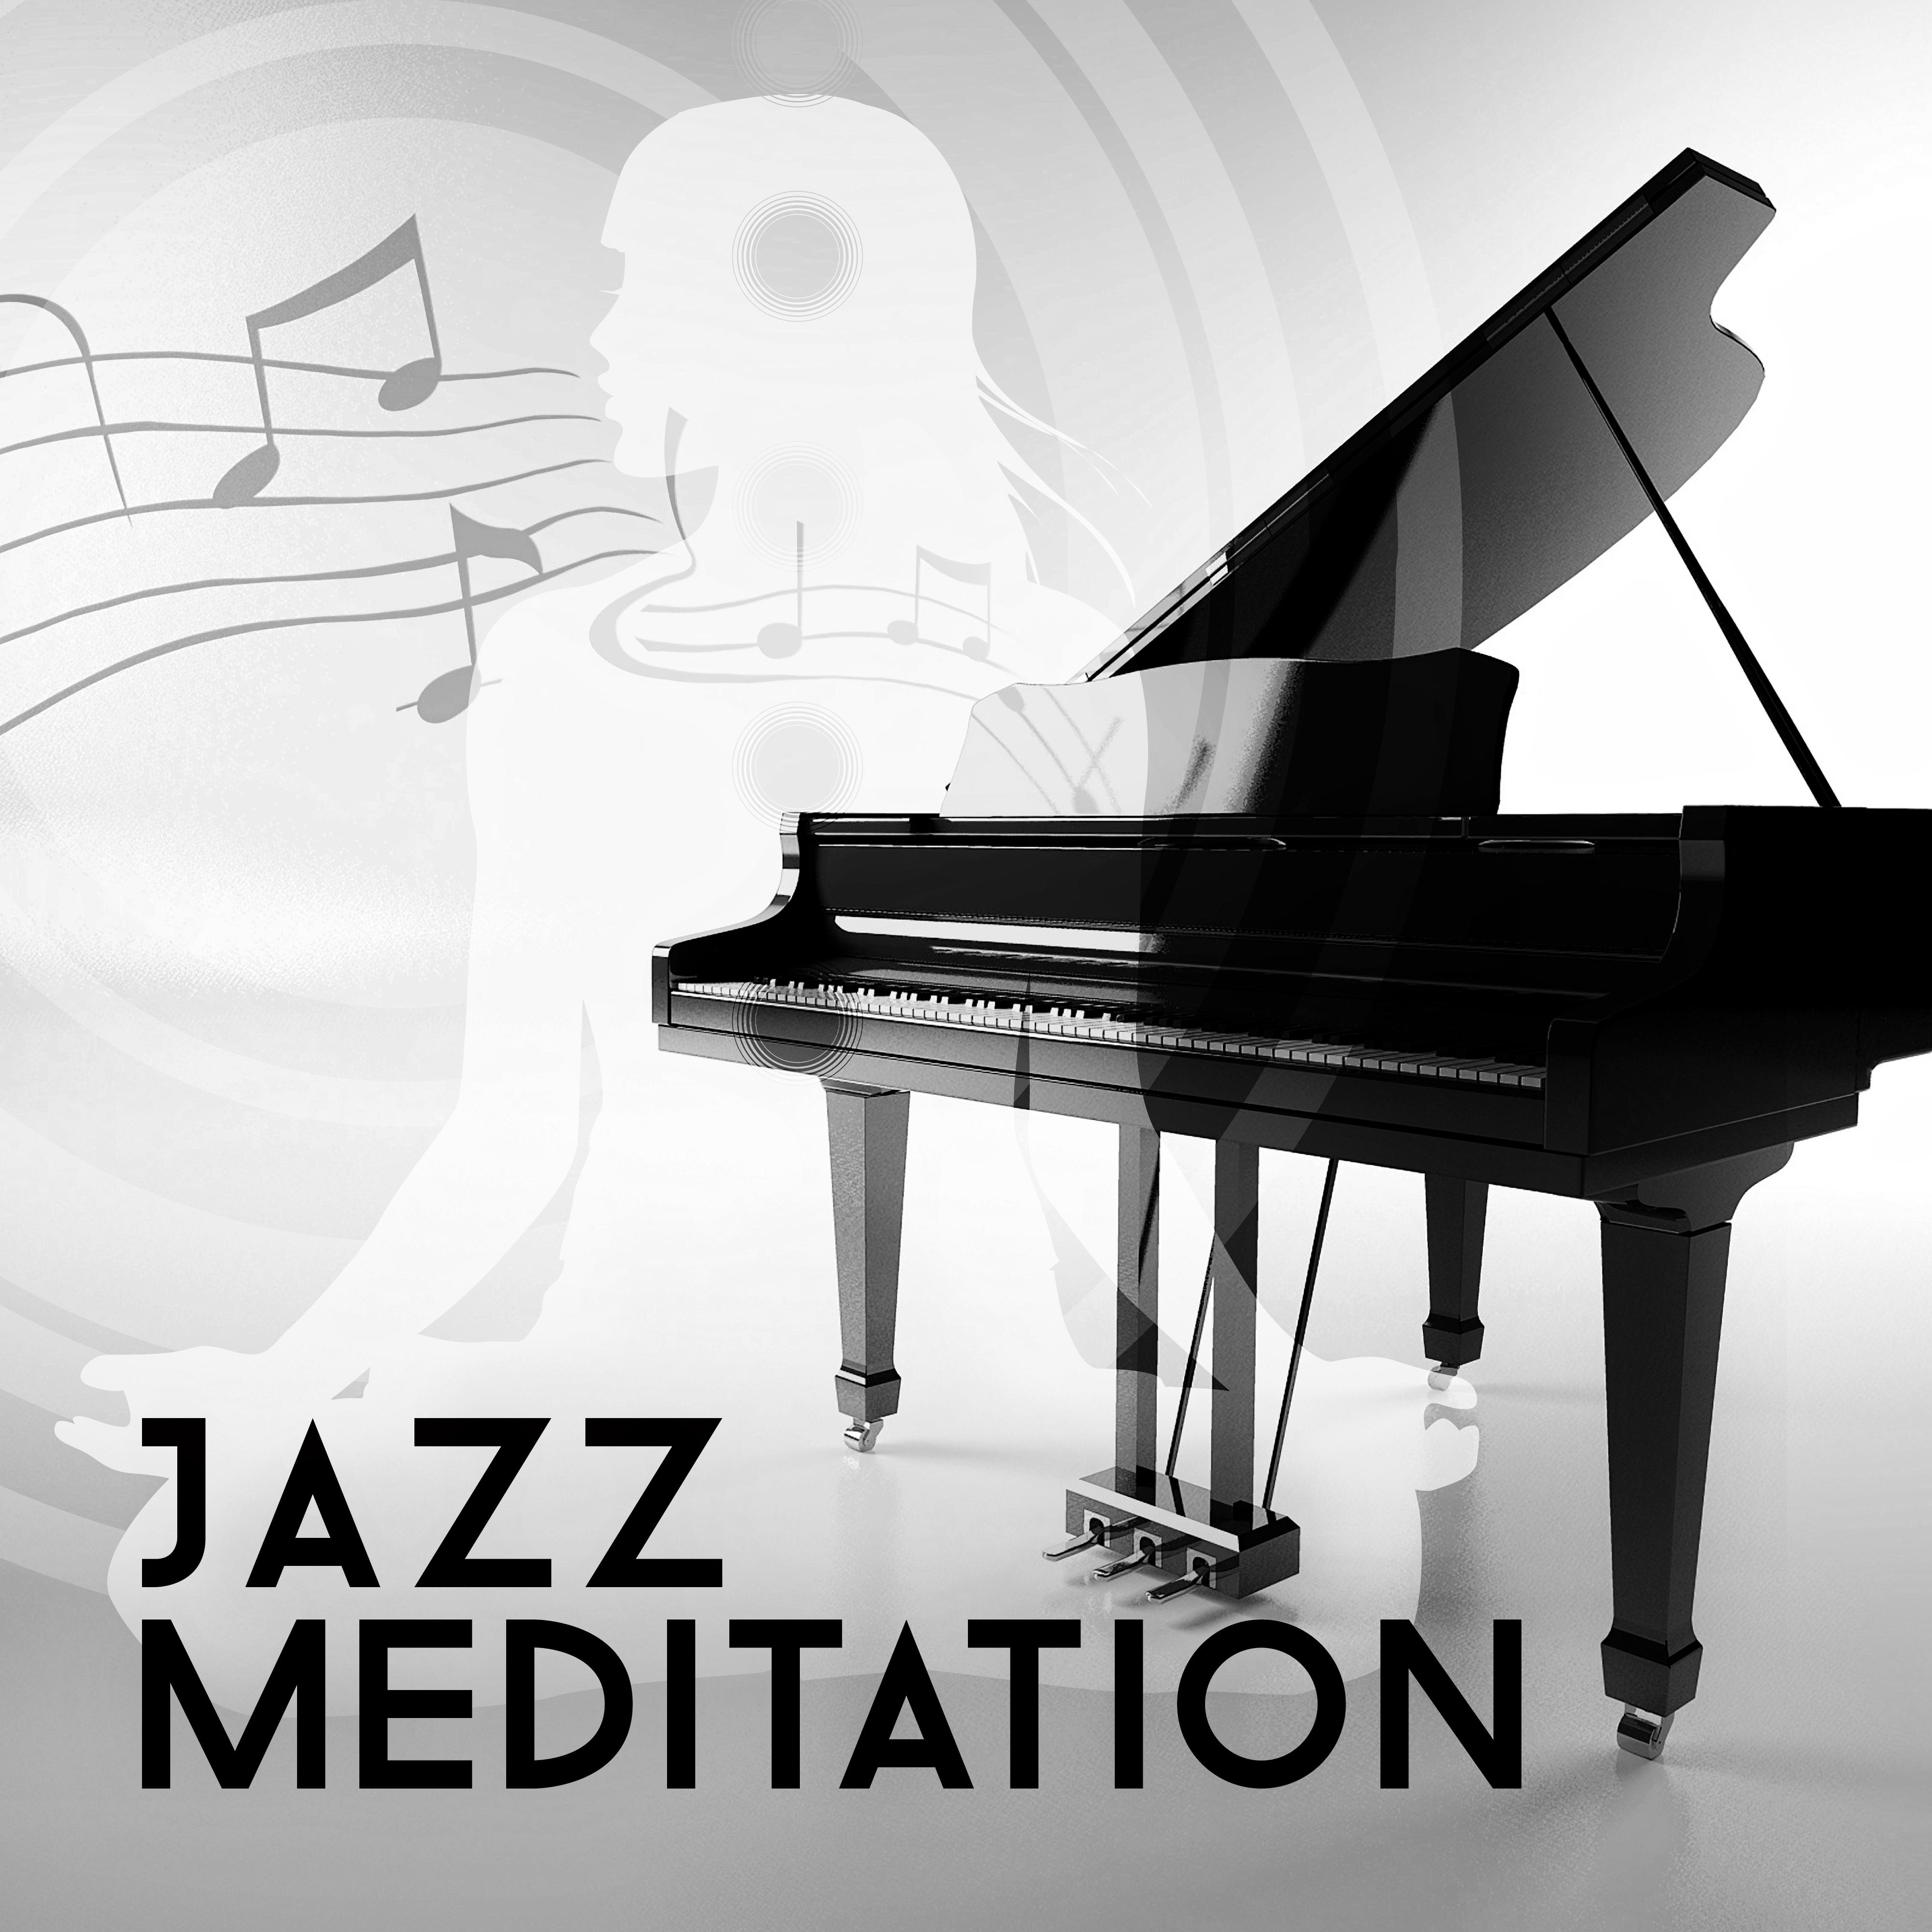 Jazz Meditation 2015  Easy Listening, Mindfulness Meditation, Smooth Music, Piano Lounge, Calming Music, Positive Thinking, Chill Out